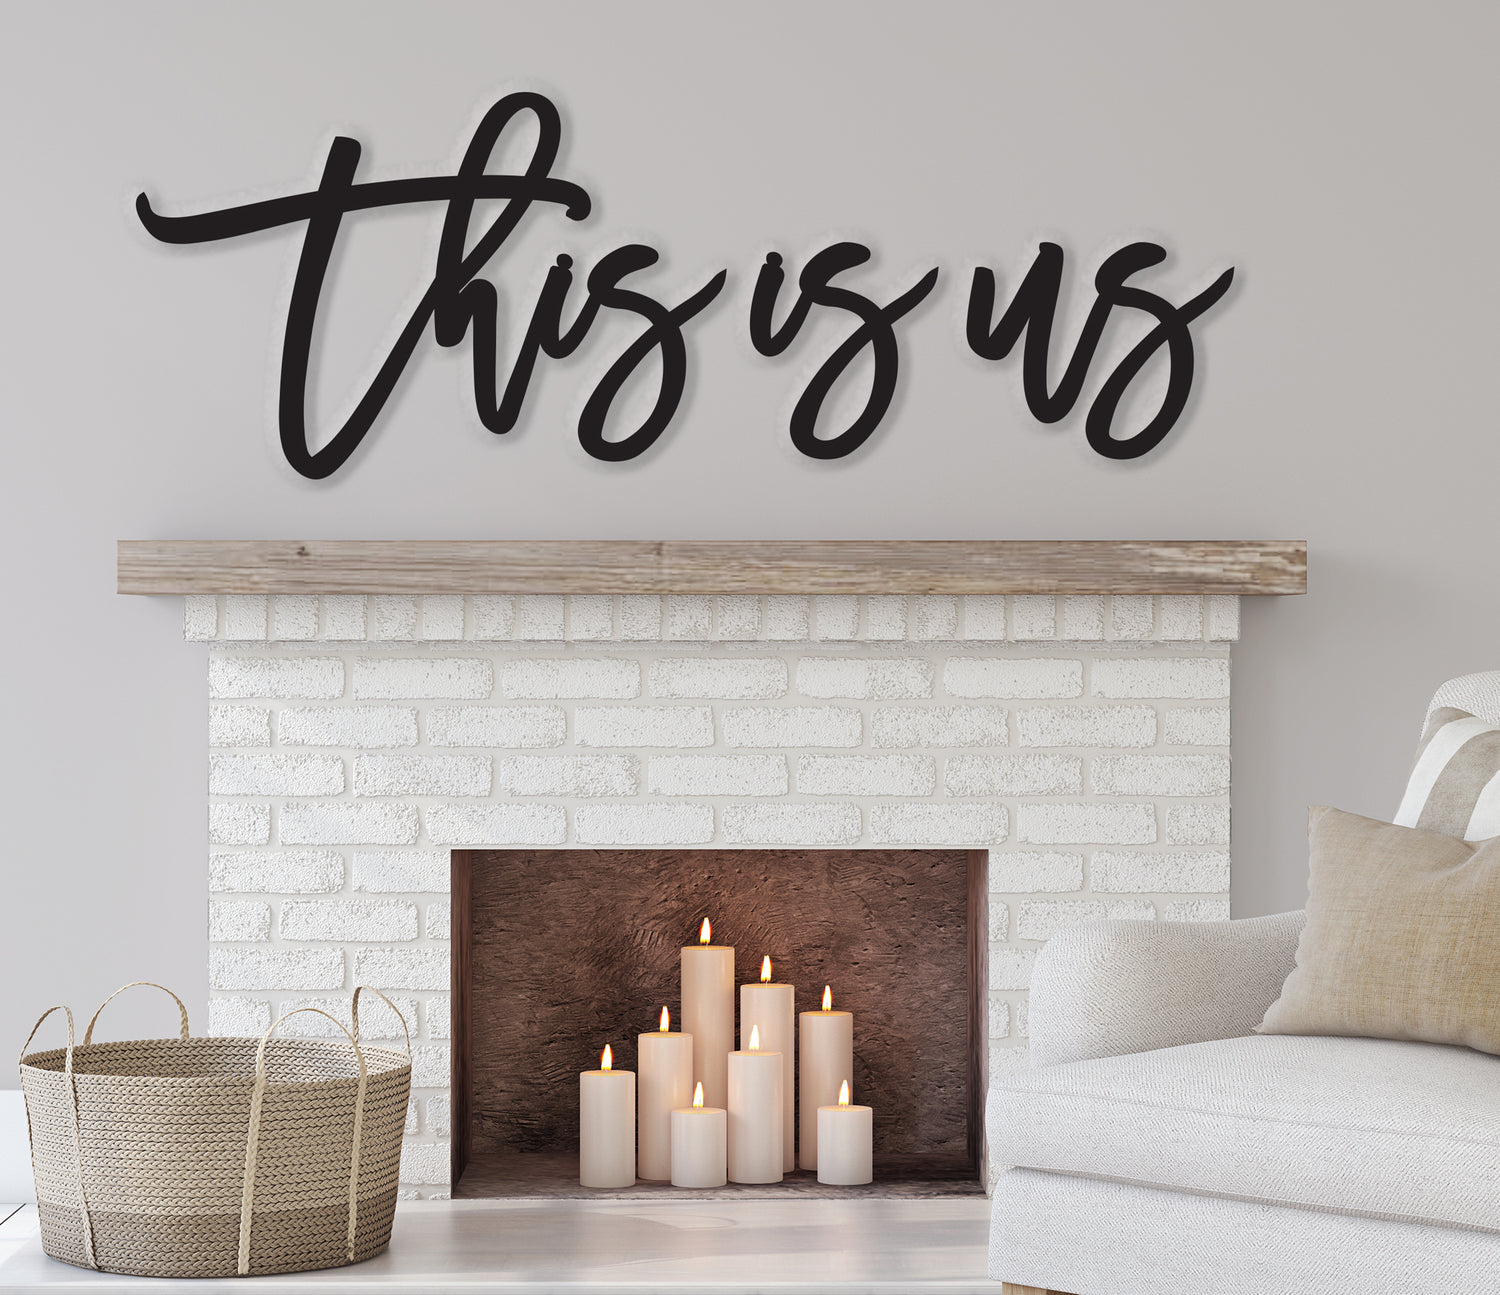 Custom Wood Words for Wall Decor, "This is us", "Family" "Gather" "Thankful" "Blessed" etc